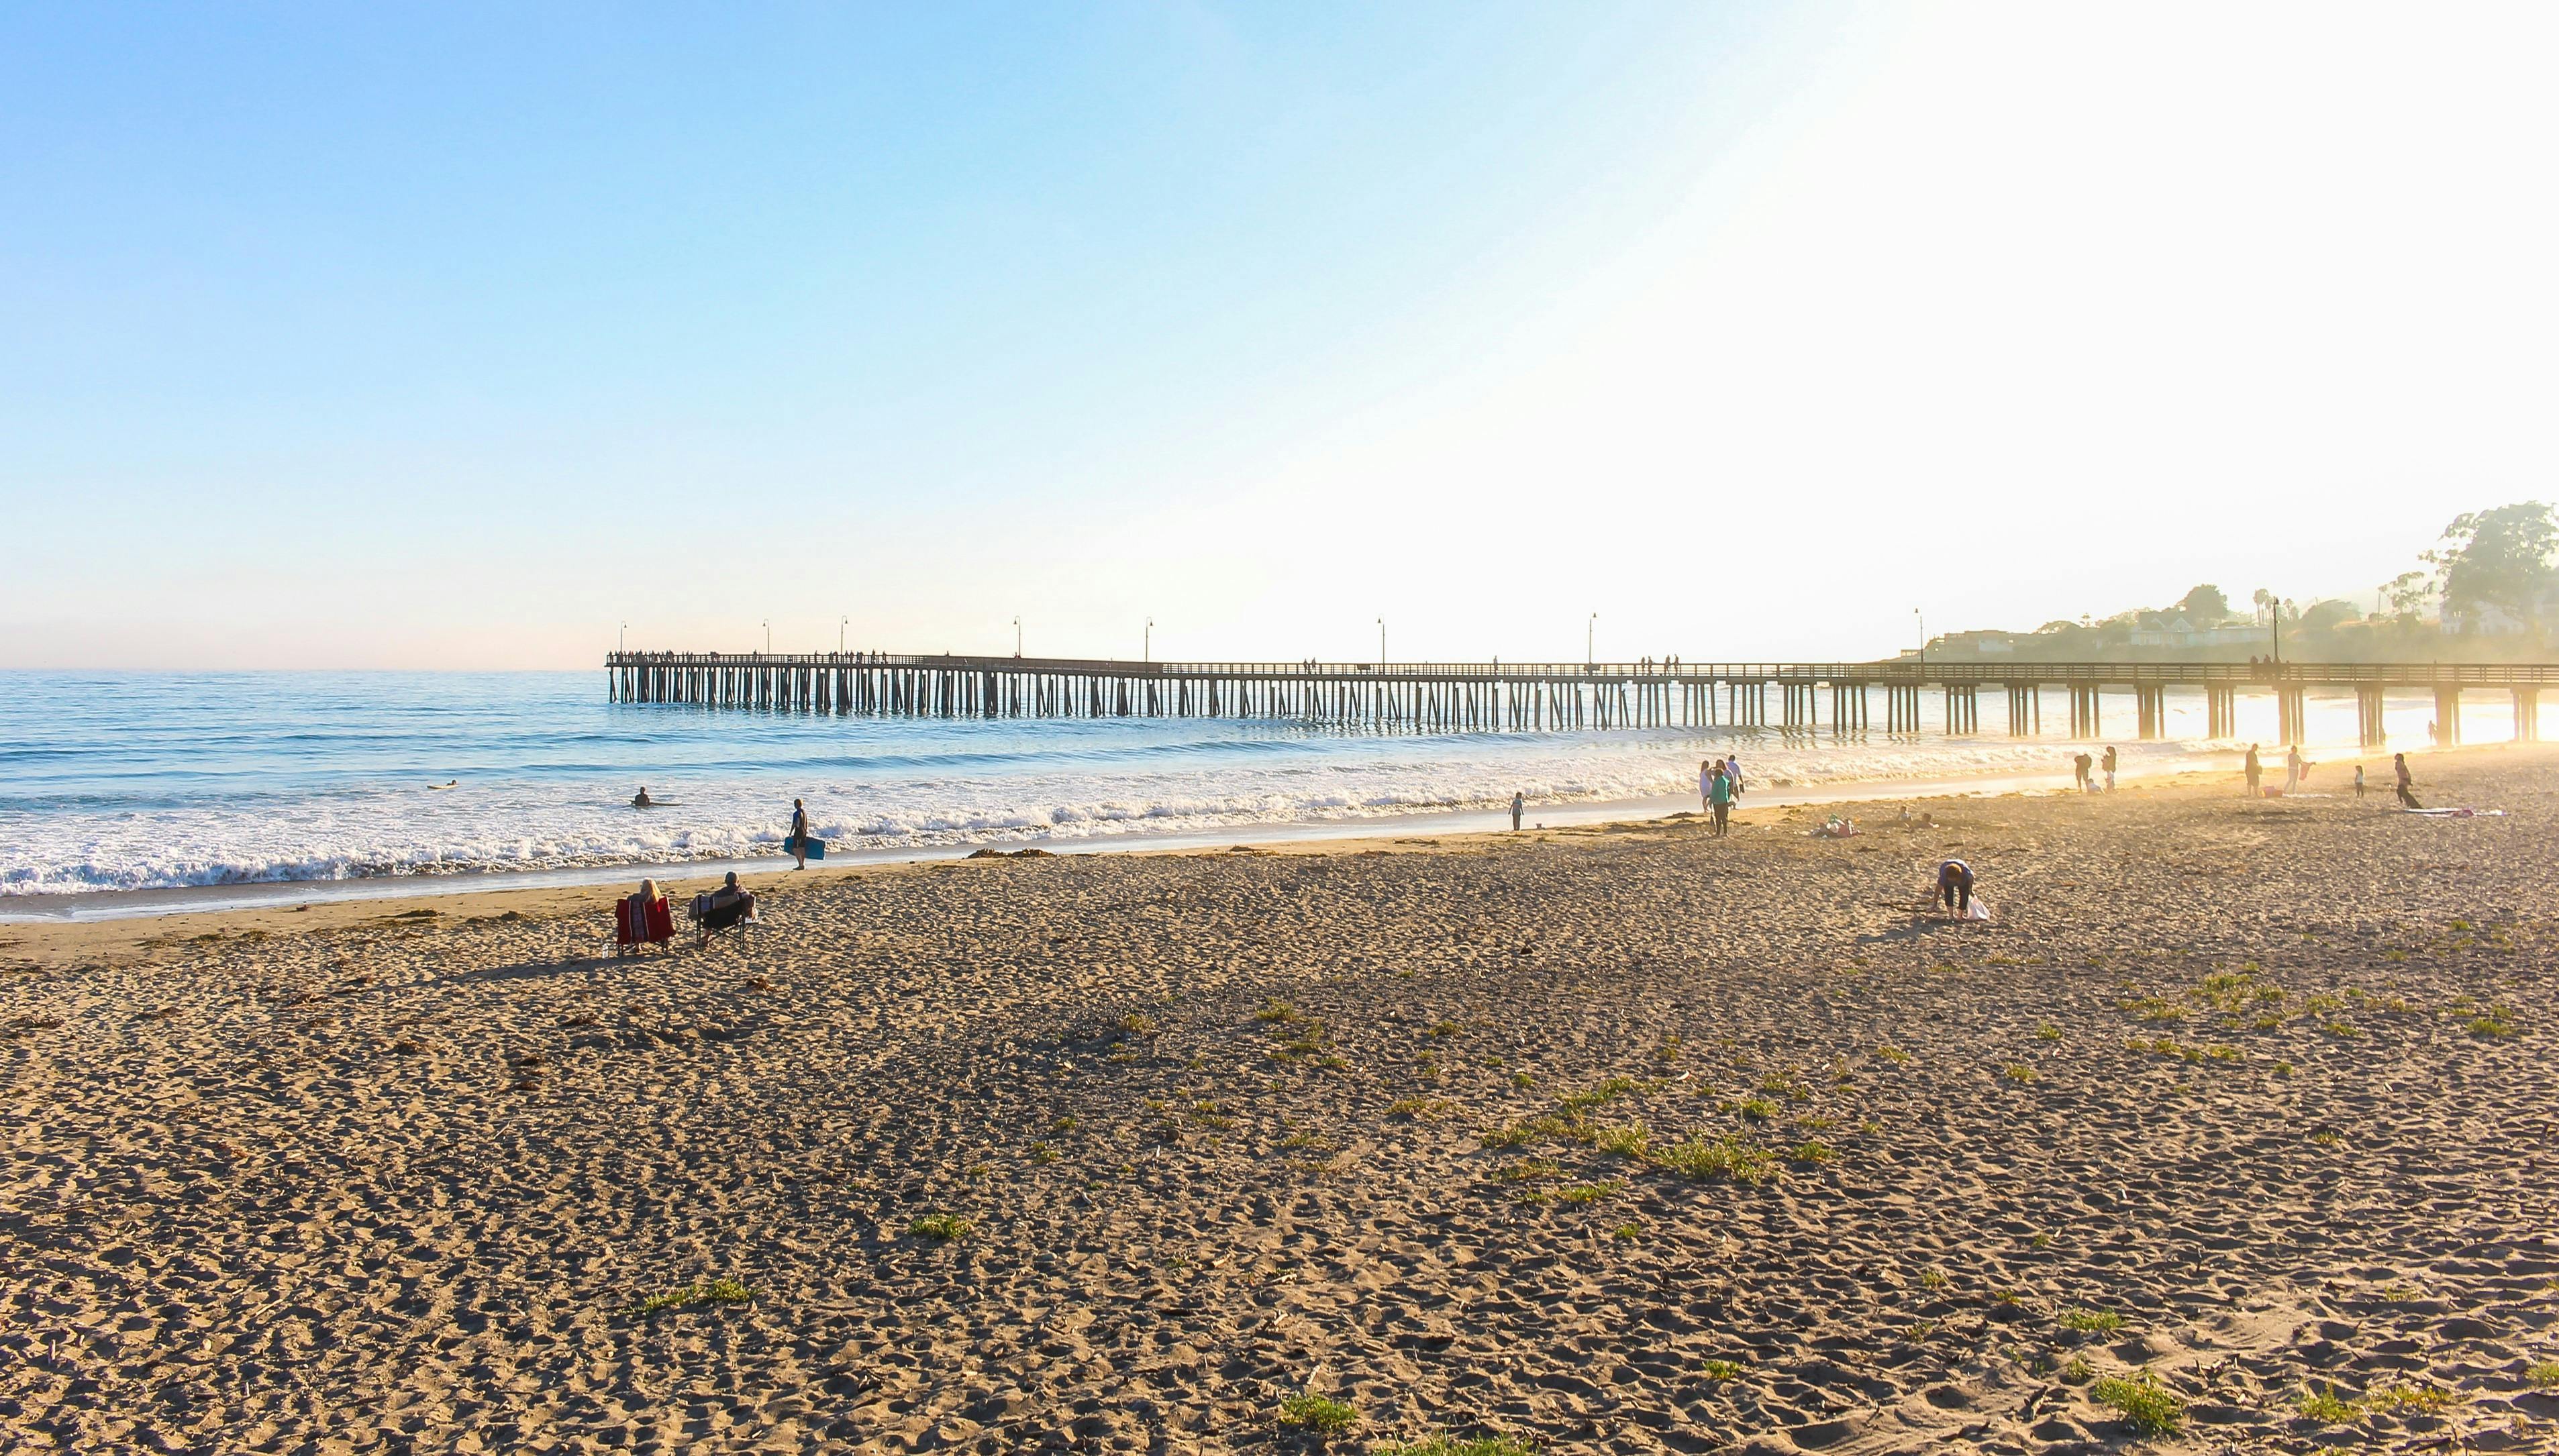 People hanging out on a sandy beach near the shore with a wooden pier out leading out into the ocean.